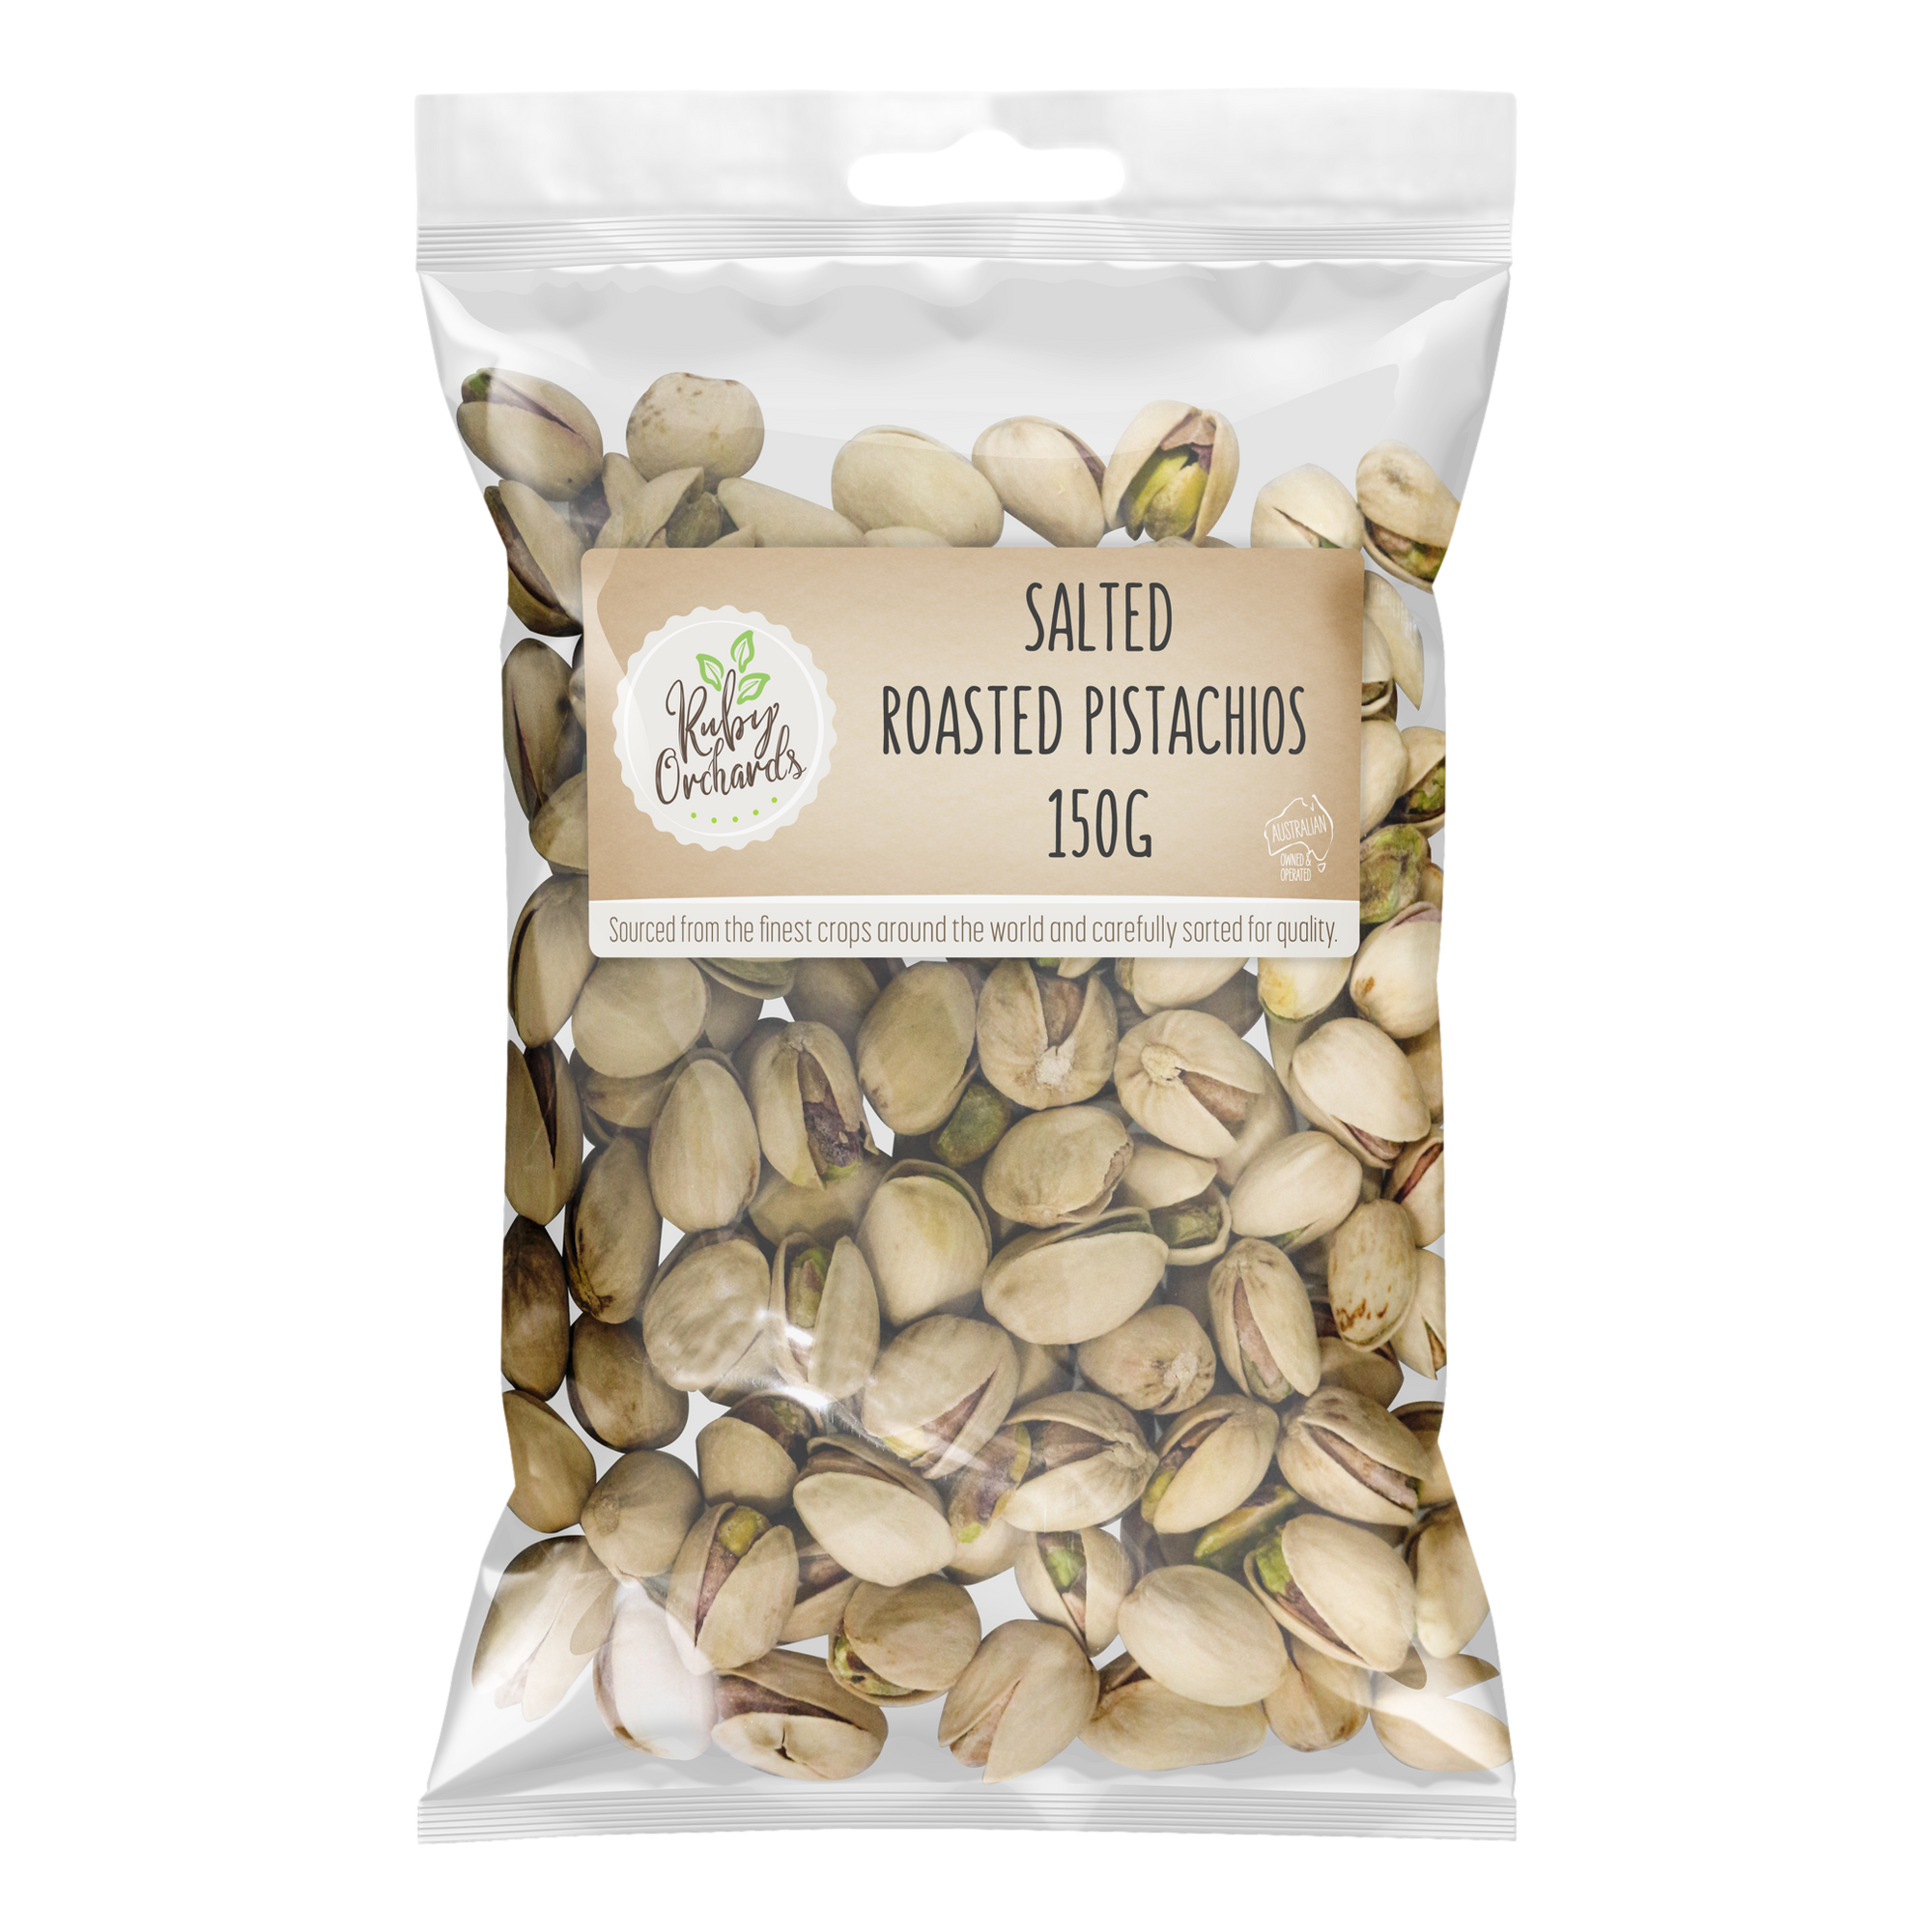 Ruby Orchards Salted Roasted Pistachios 150g